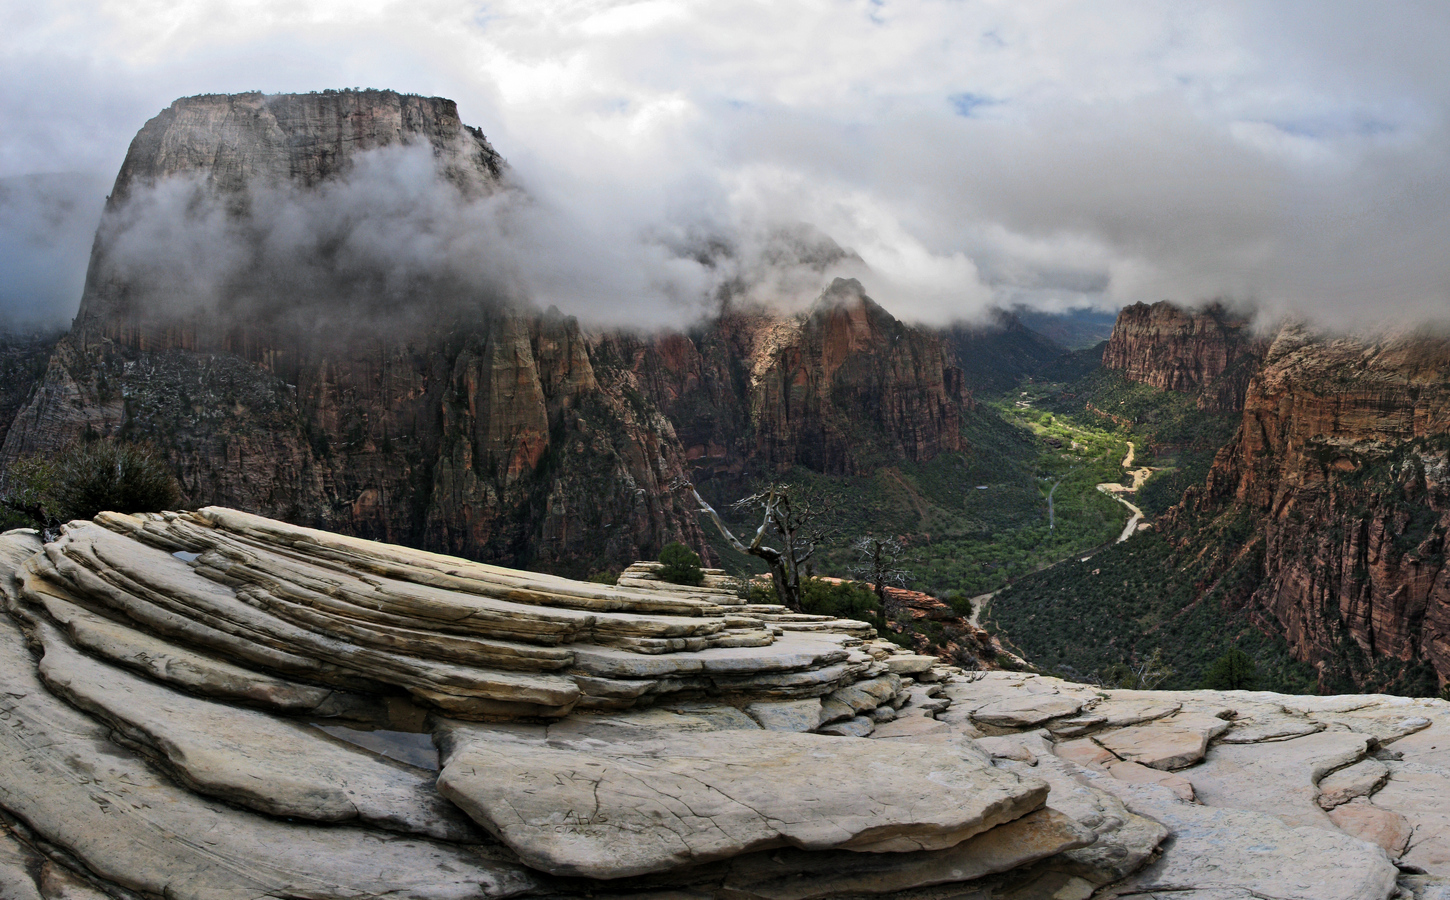 Angels Landing - At the top